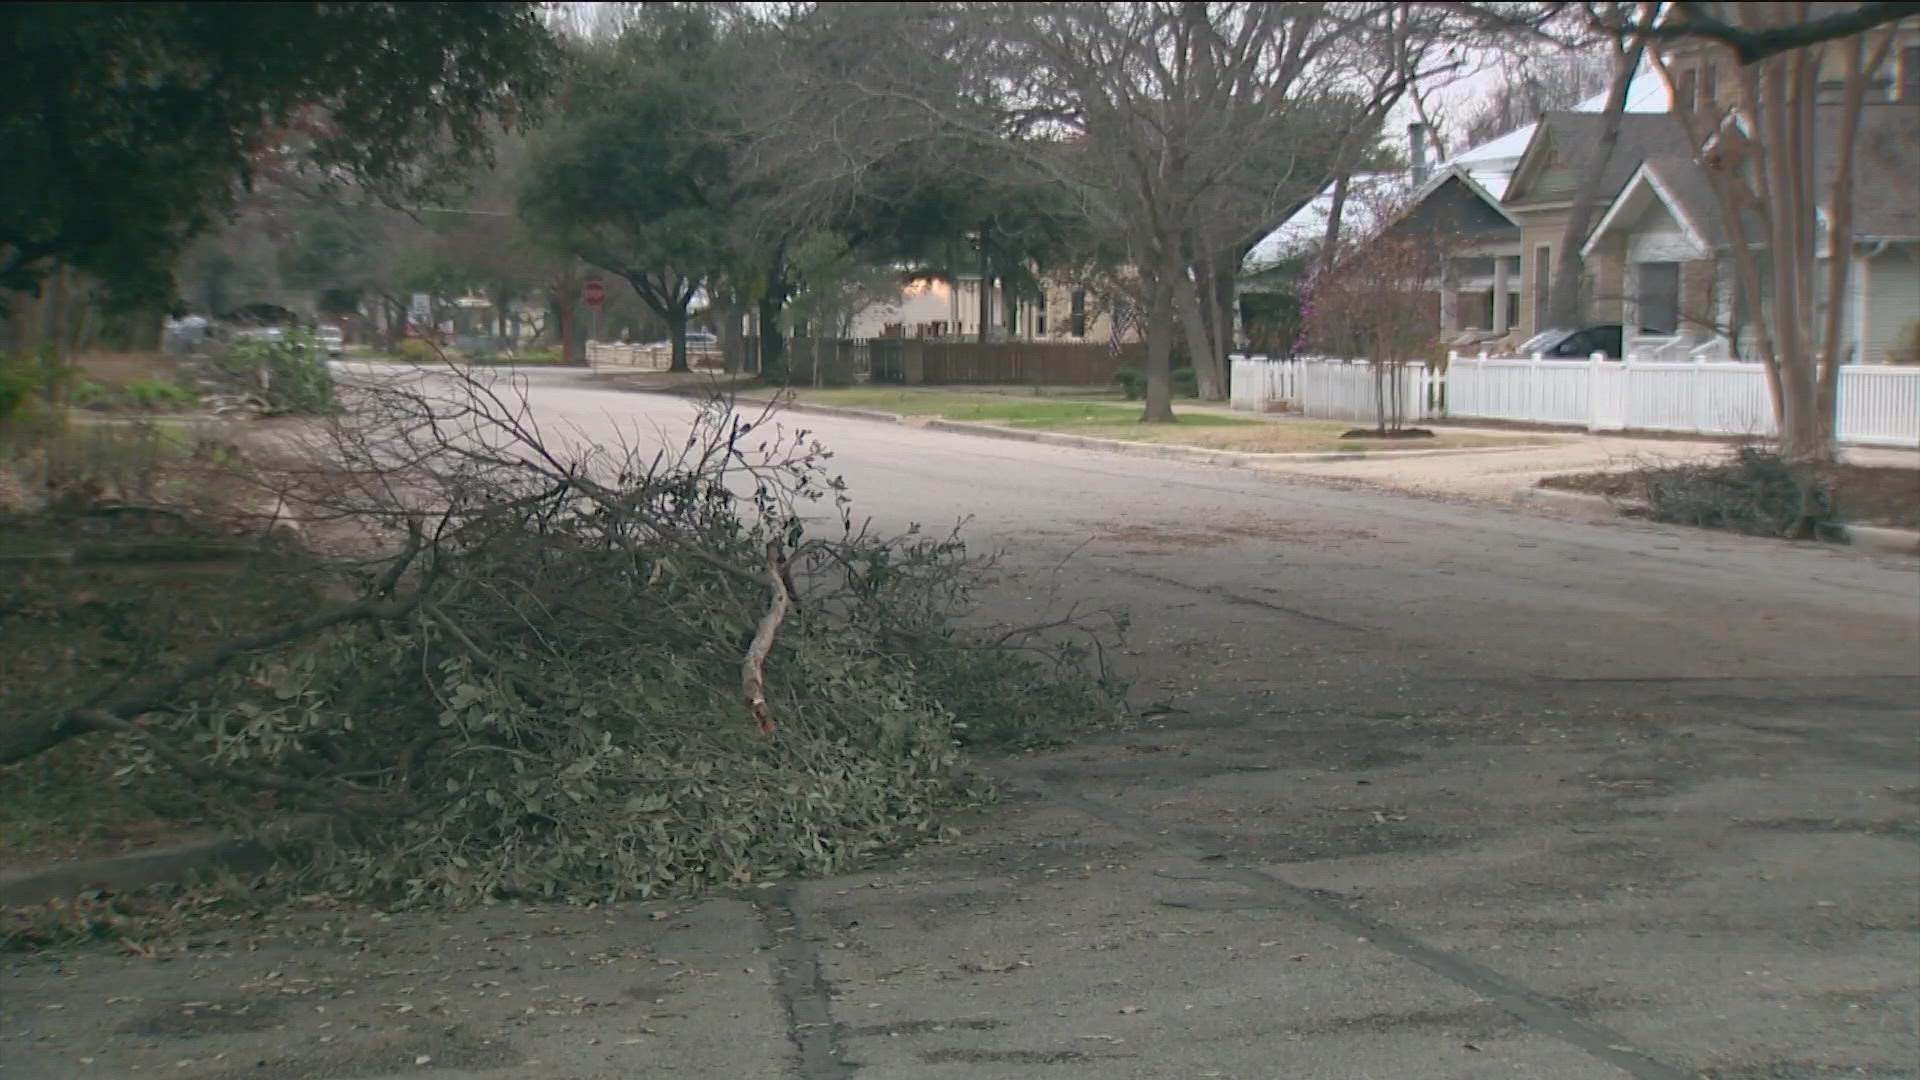 The Austin Disaster relief network is helping clear debris.